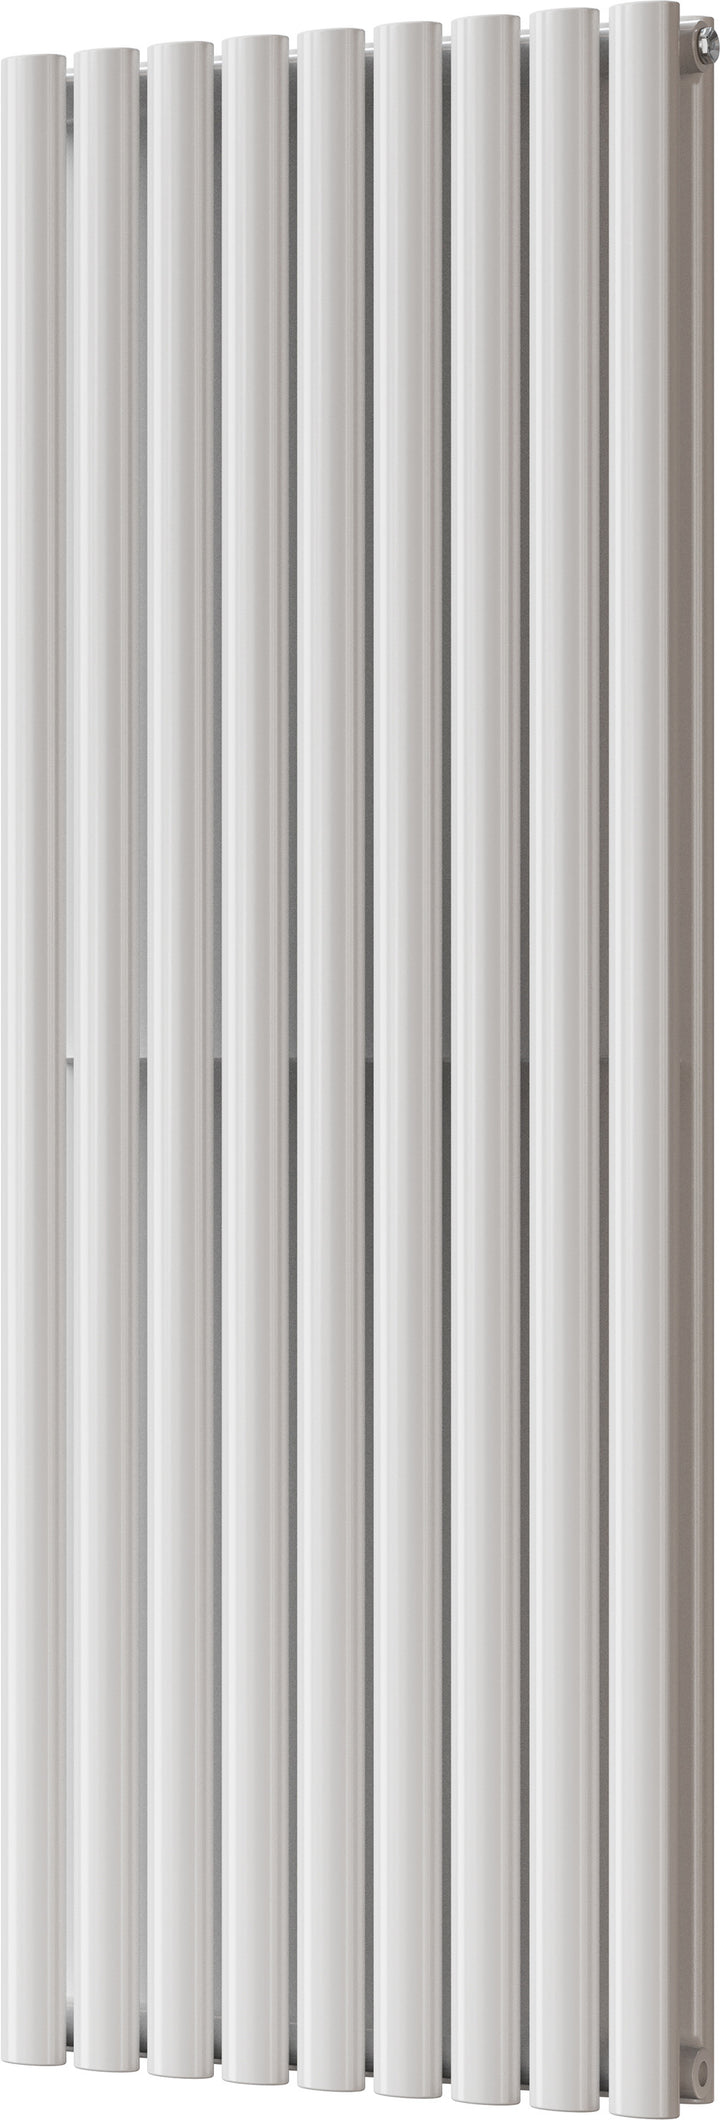 Omeara - White Vertical Radiator H1400mm x W522mm Double Panel